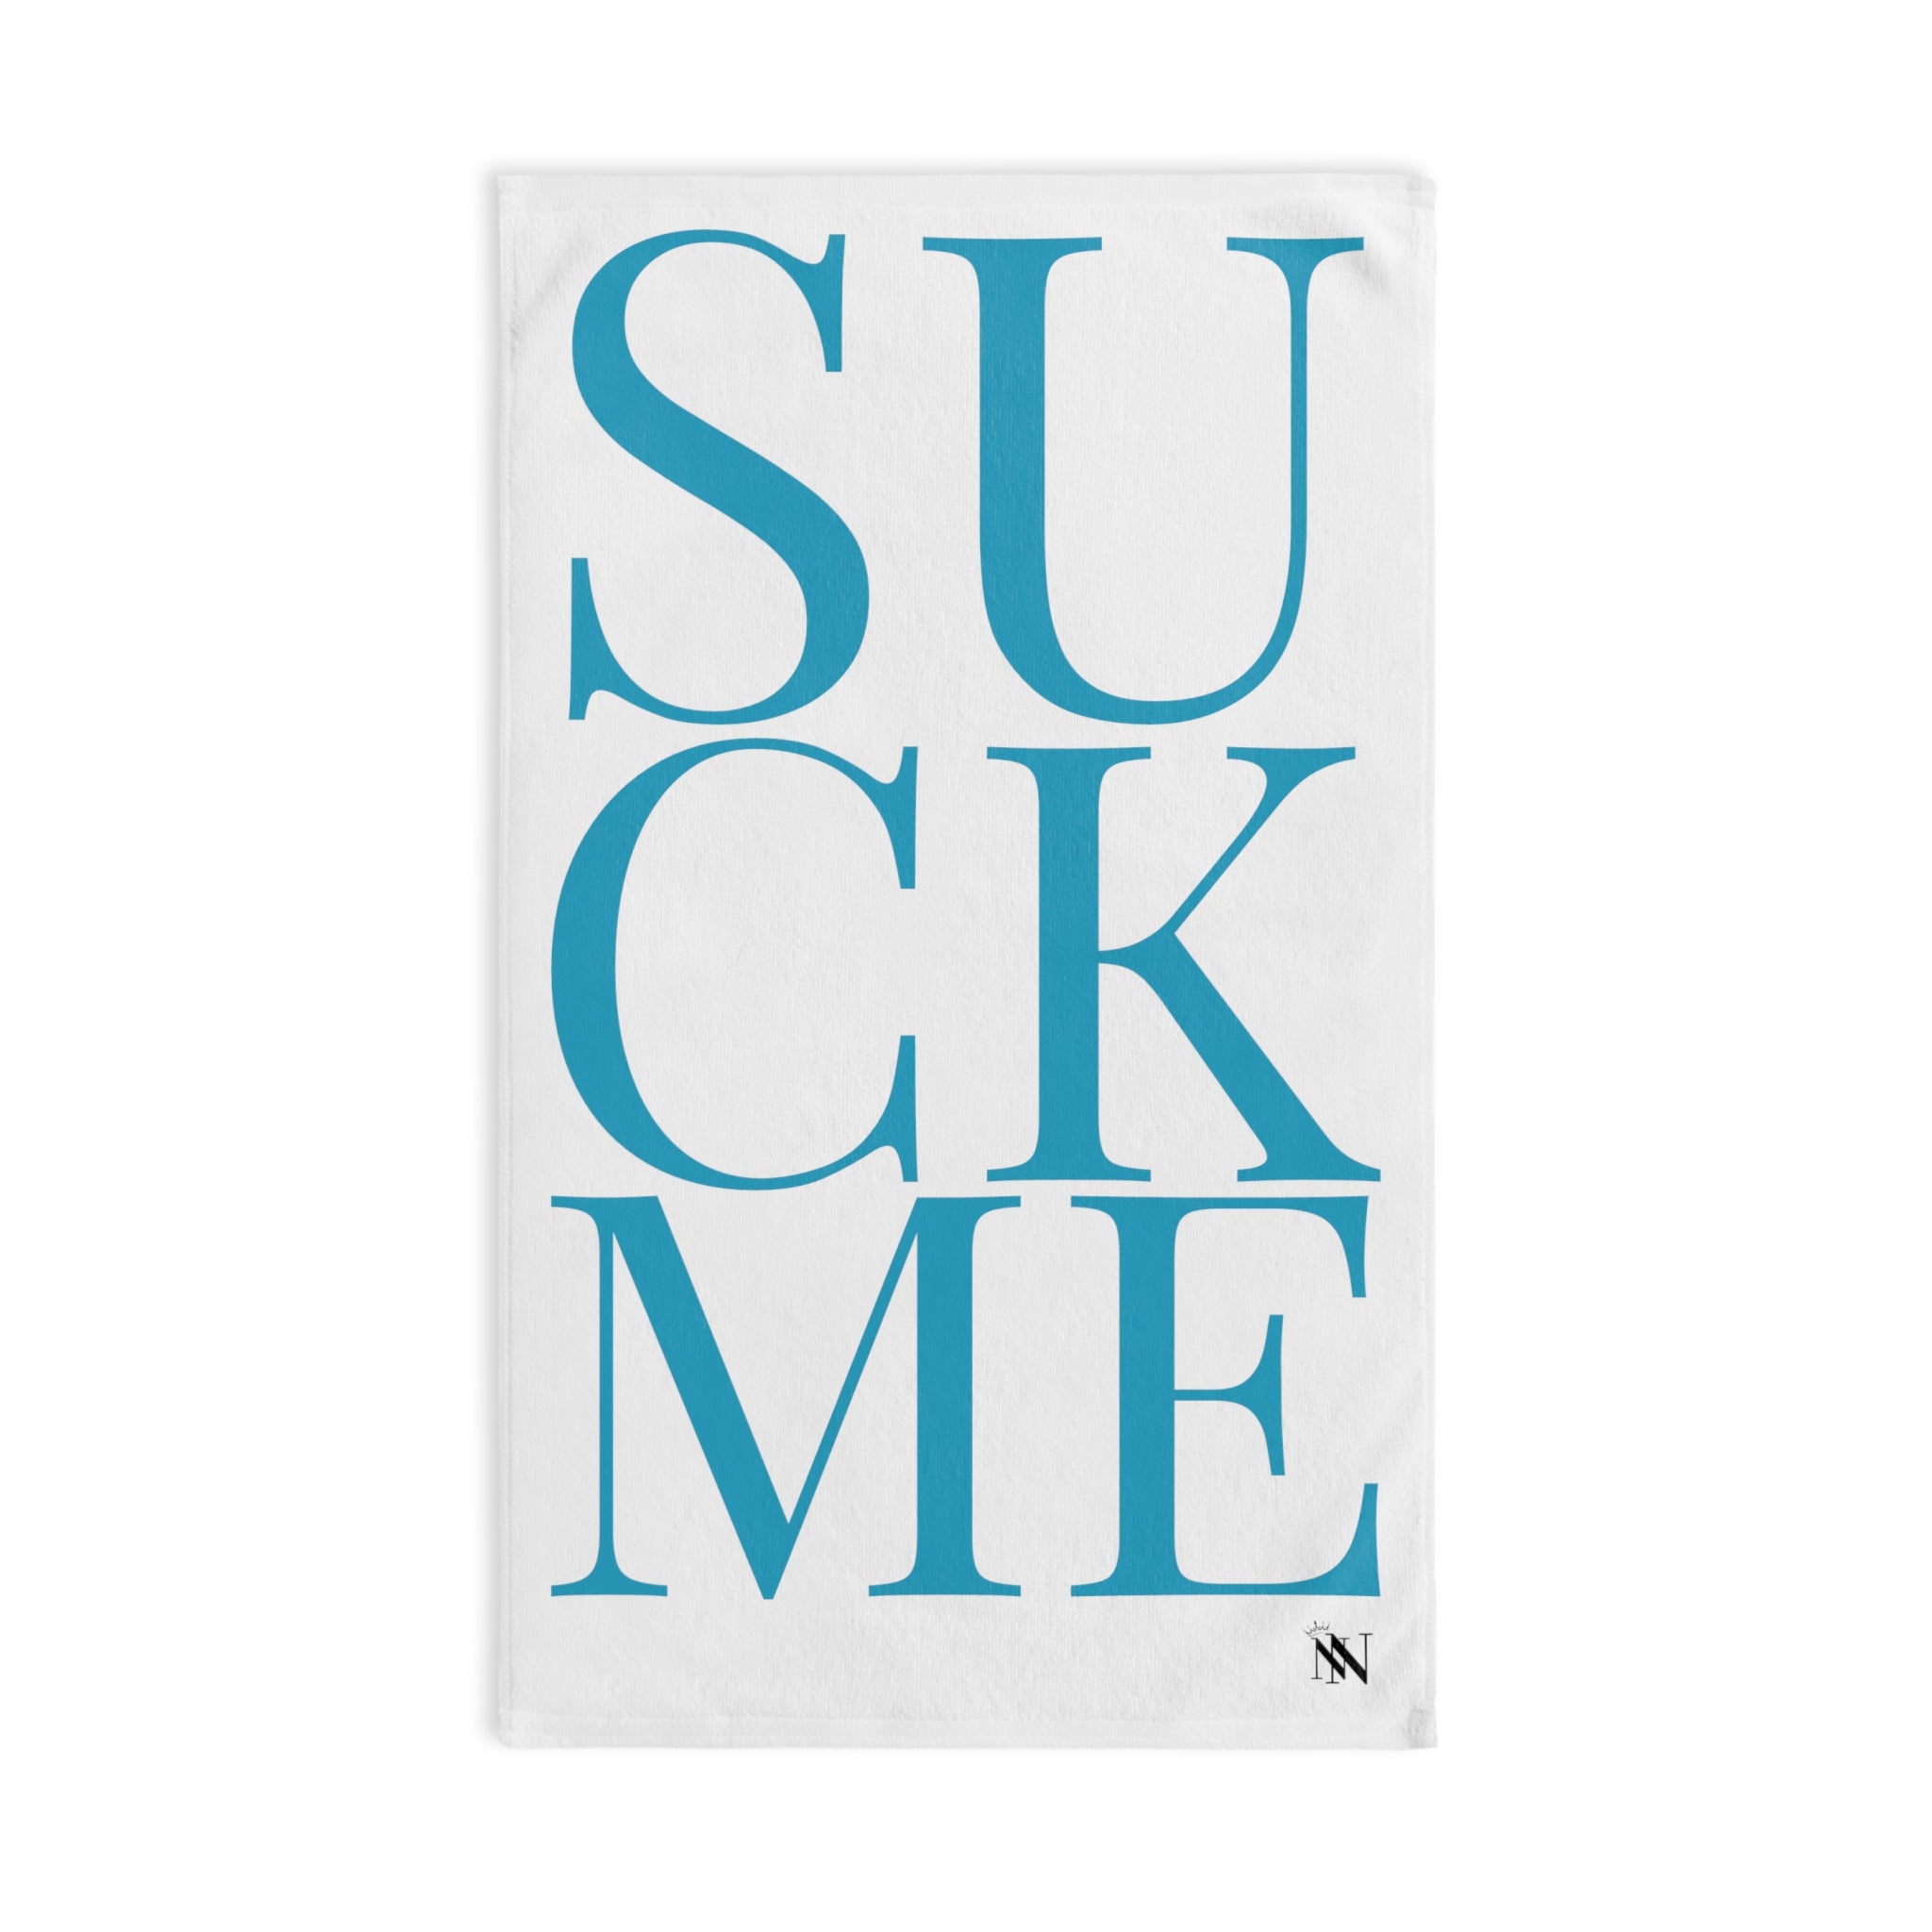 Suck Me Teal White | Funny Gifts for Men - Gifts for Him - Birthday Gifts for Men, Him, Her, Husband, Boyfriend, Girlfriend, New Couple Gifts, Fathers & Valentines Day Gifts, Christmas Gifts NECTAR NAPKINS